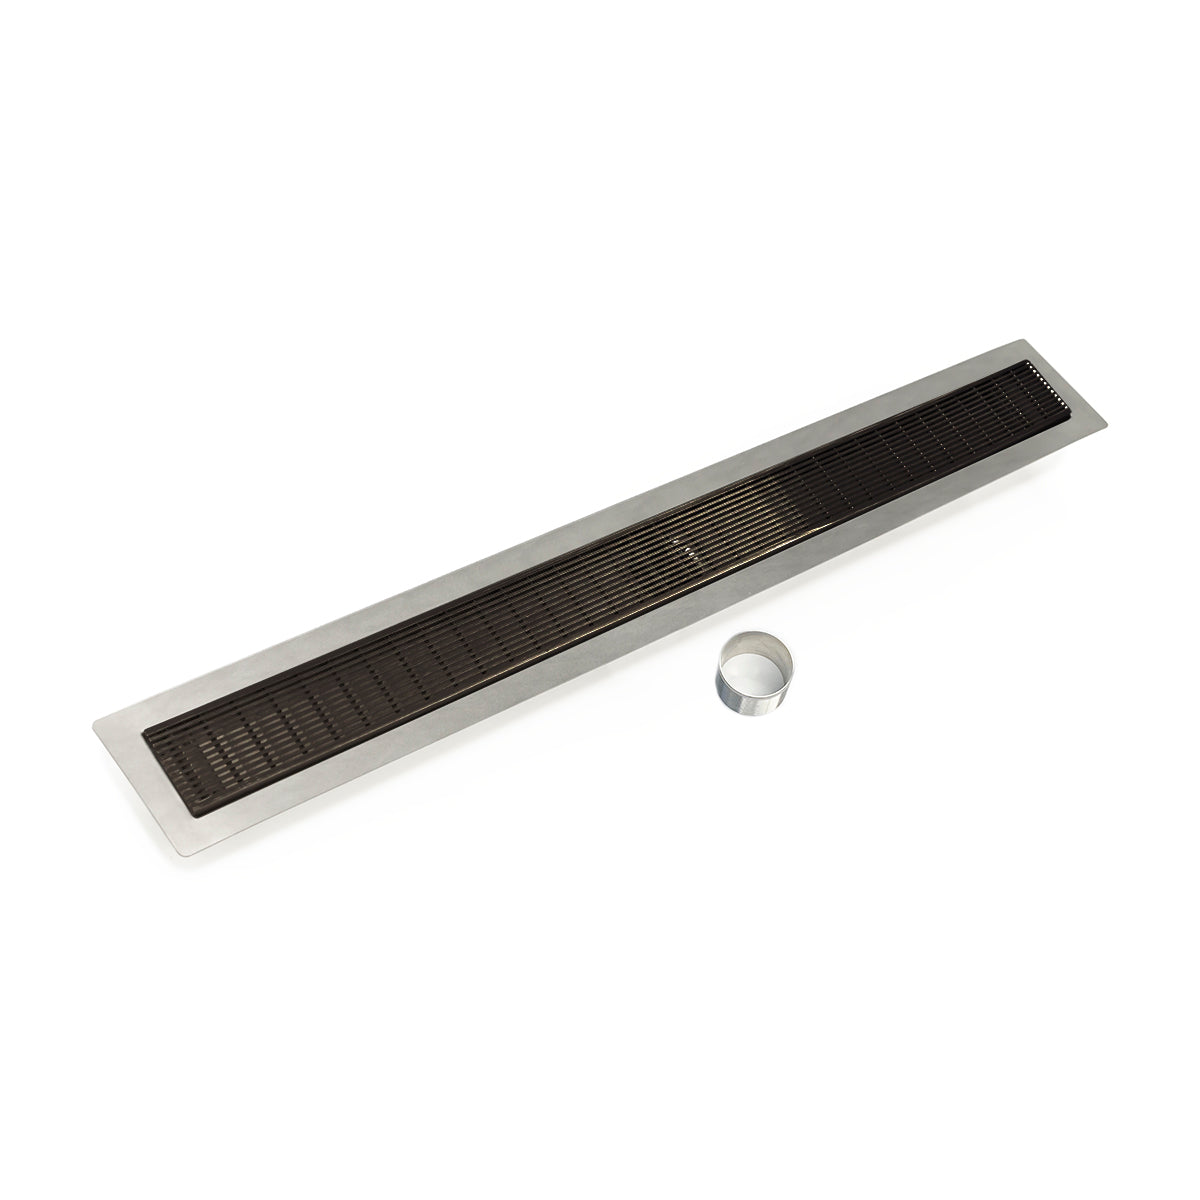 Infinity Drain 42" FCB Series Double Waterproofing Linear Drain Kit with 2 1/2" Wedge Wire Grate